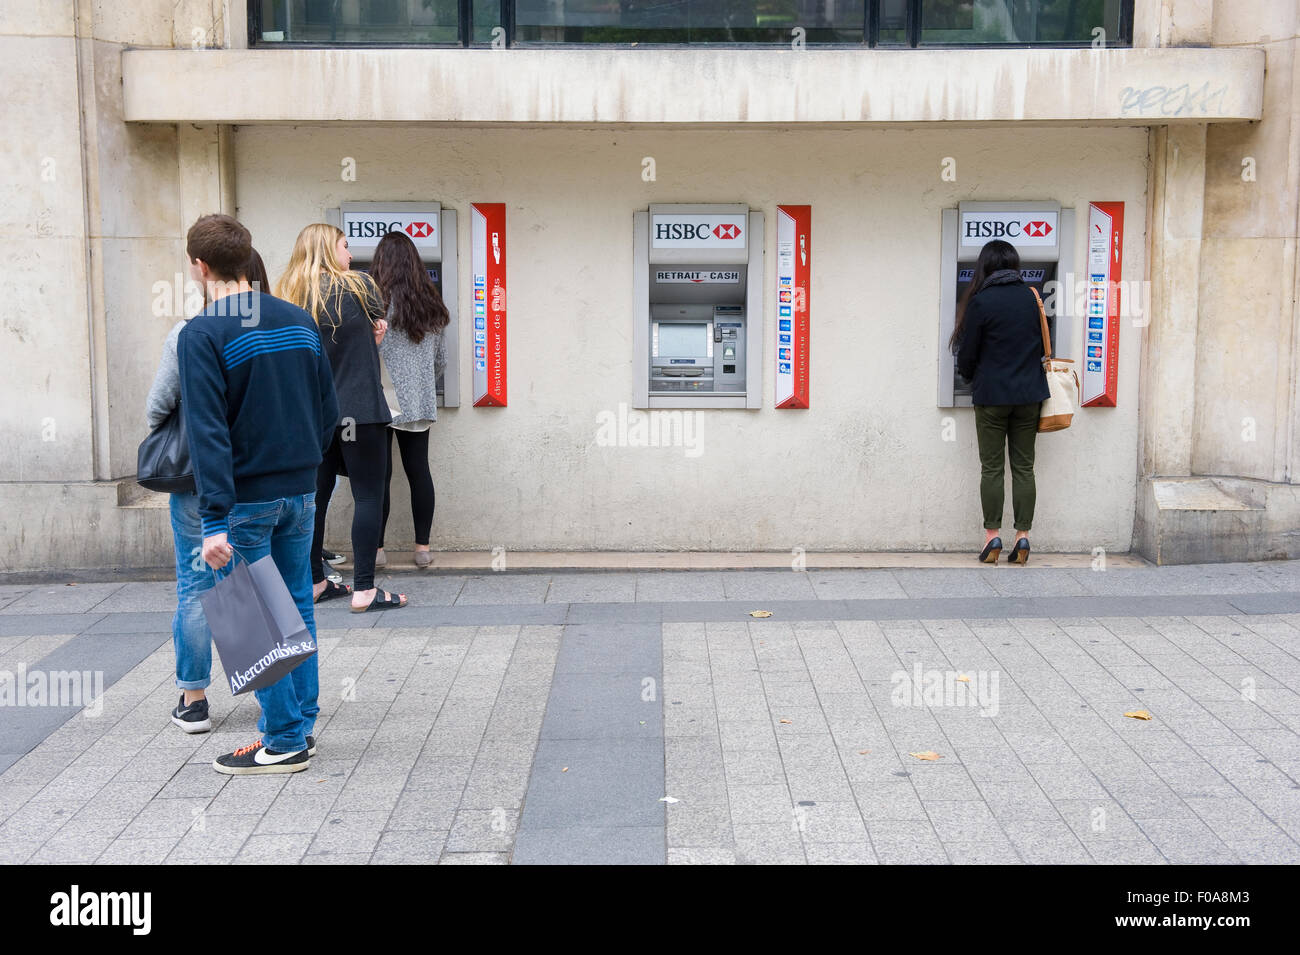 PARIS, FRANCE - JULY 28, 2015: People waiting for an ATM machine to withdraw money on a street in Paris in France. Stock Photo